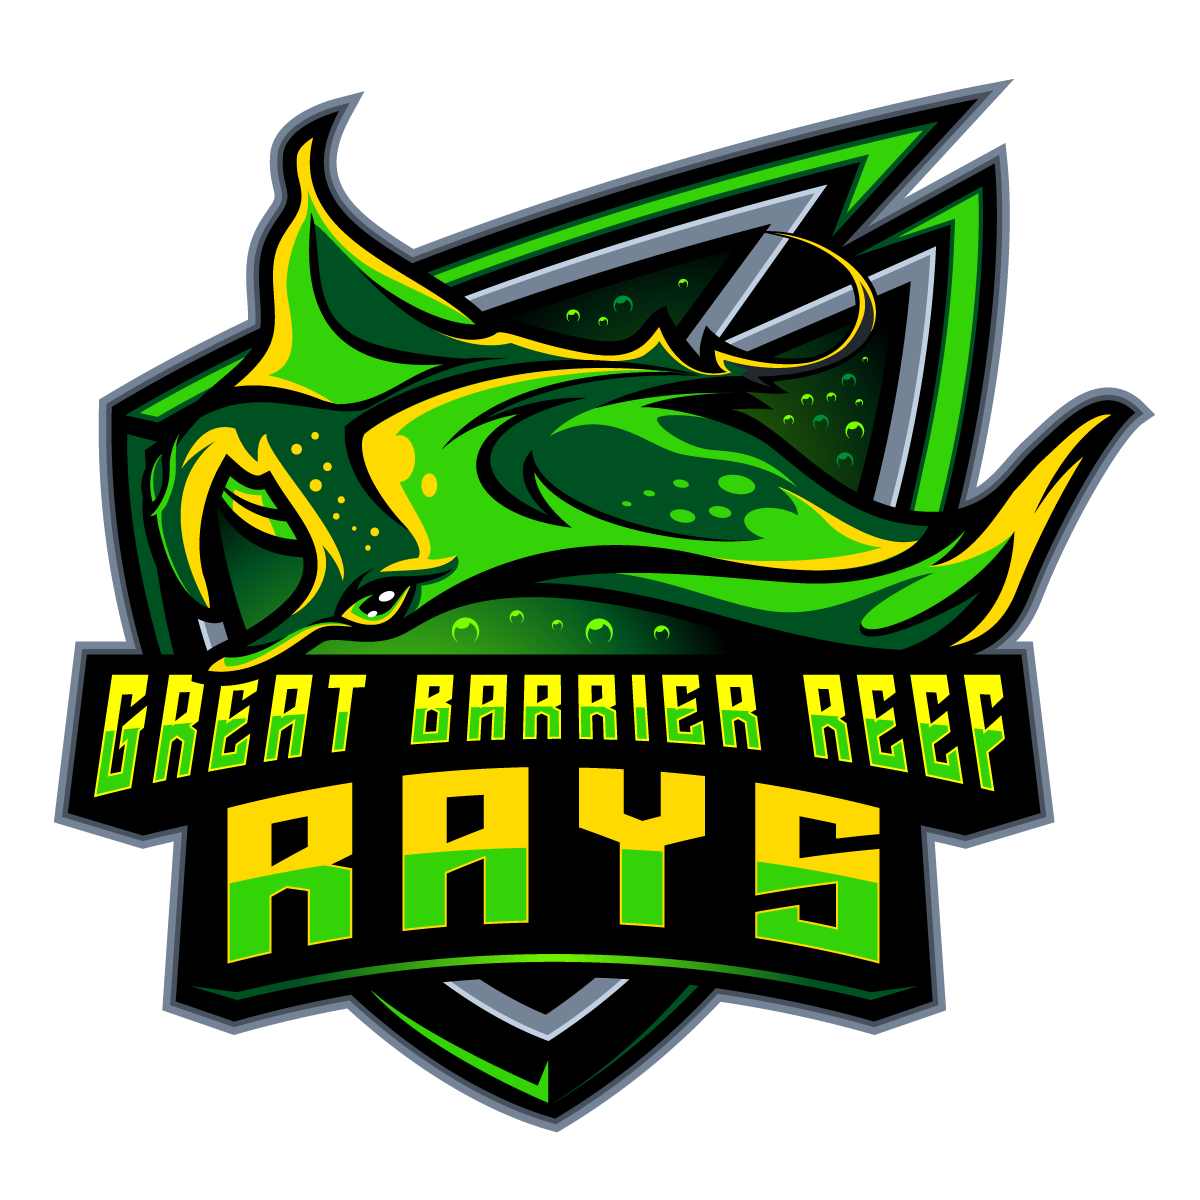 Great Barrier Reef Rays - Campaign